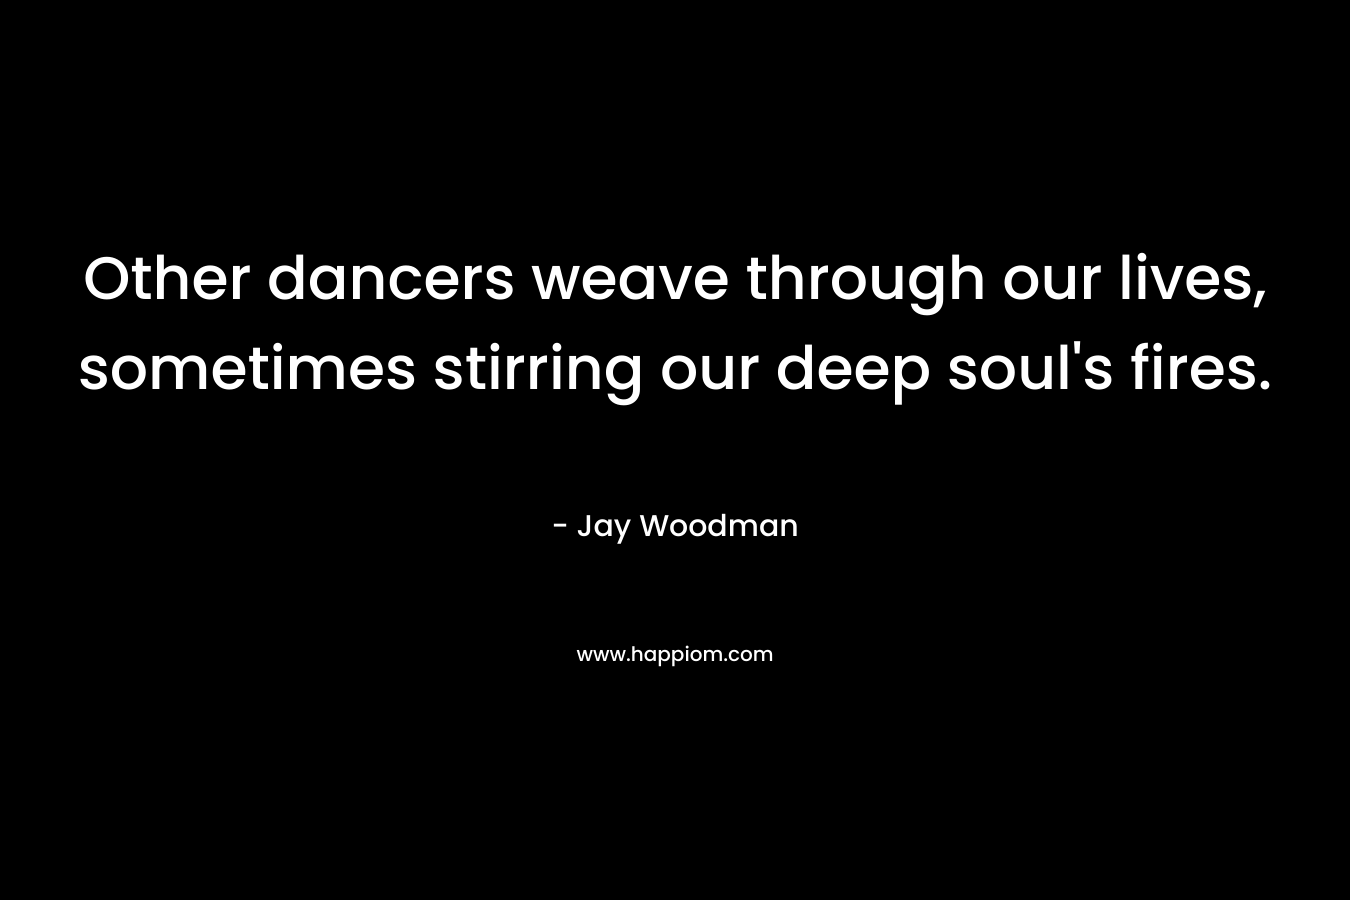 Other dancers weave through our lives, sometimes stirring our deep soul’s fires. – Jay Woodman